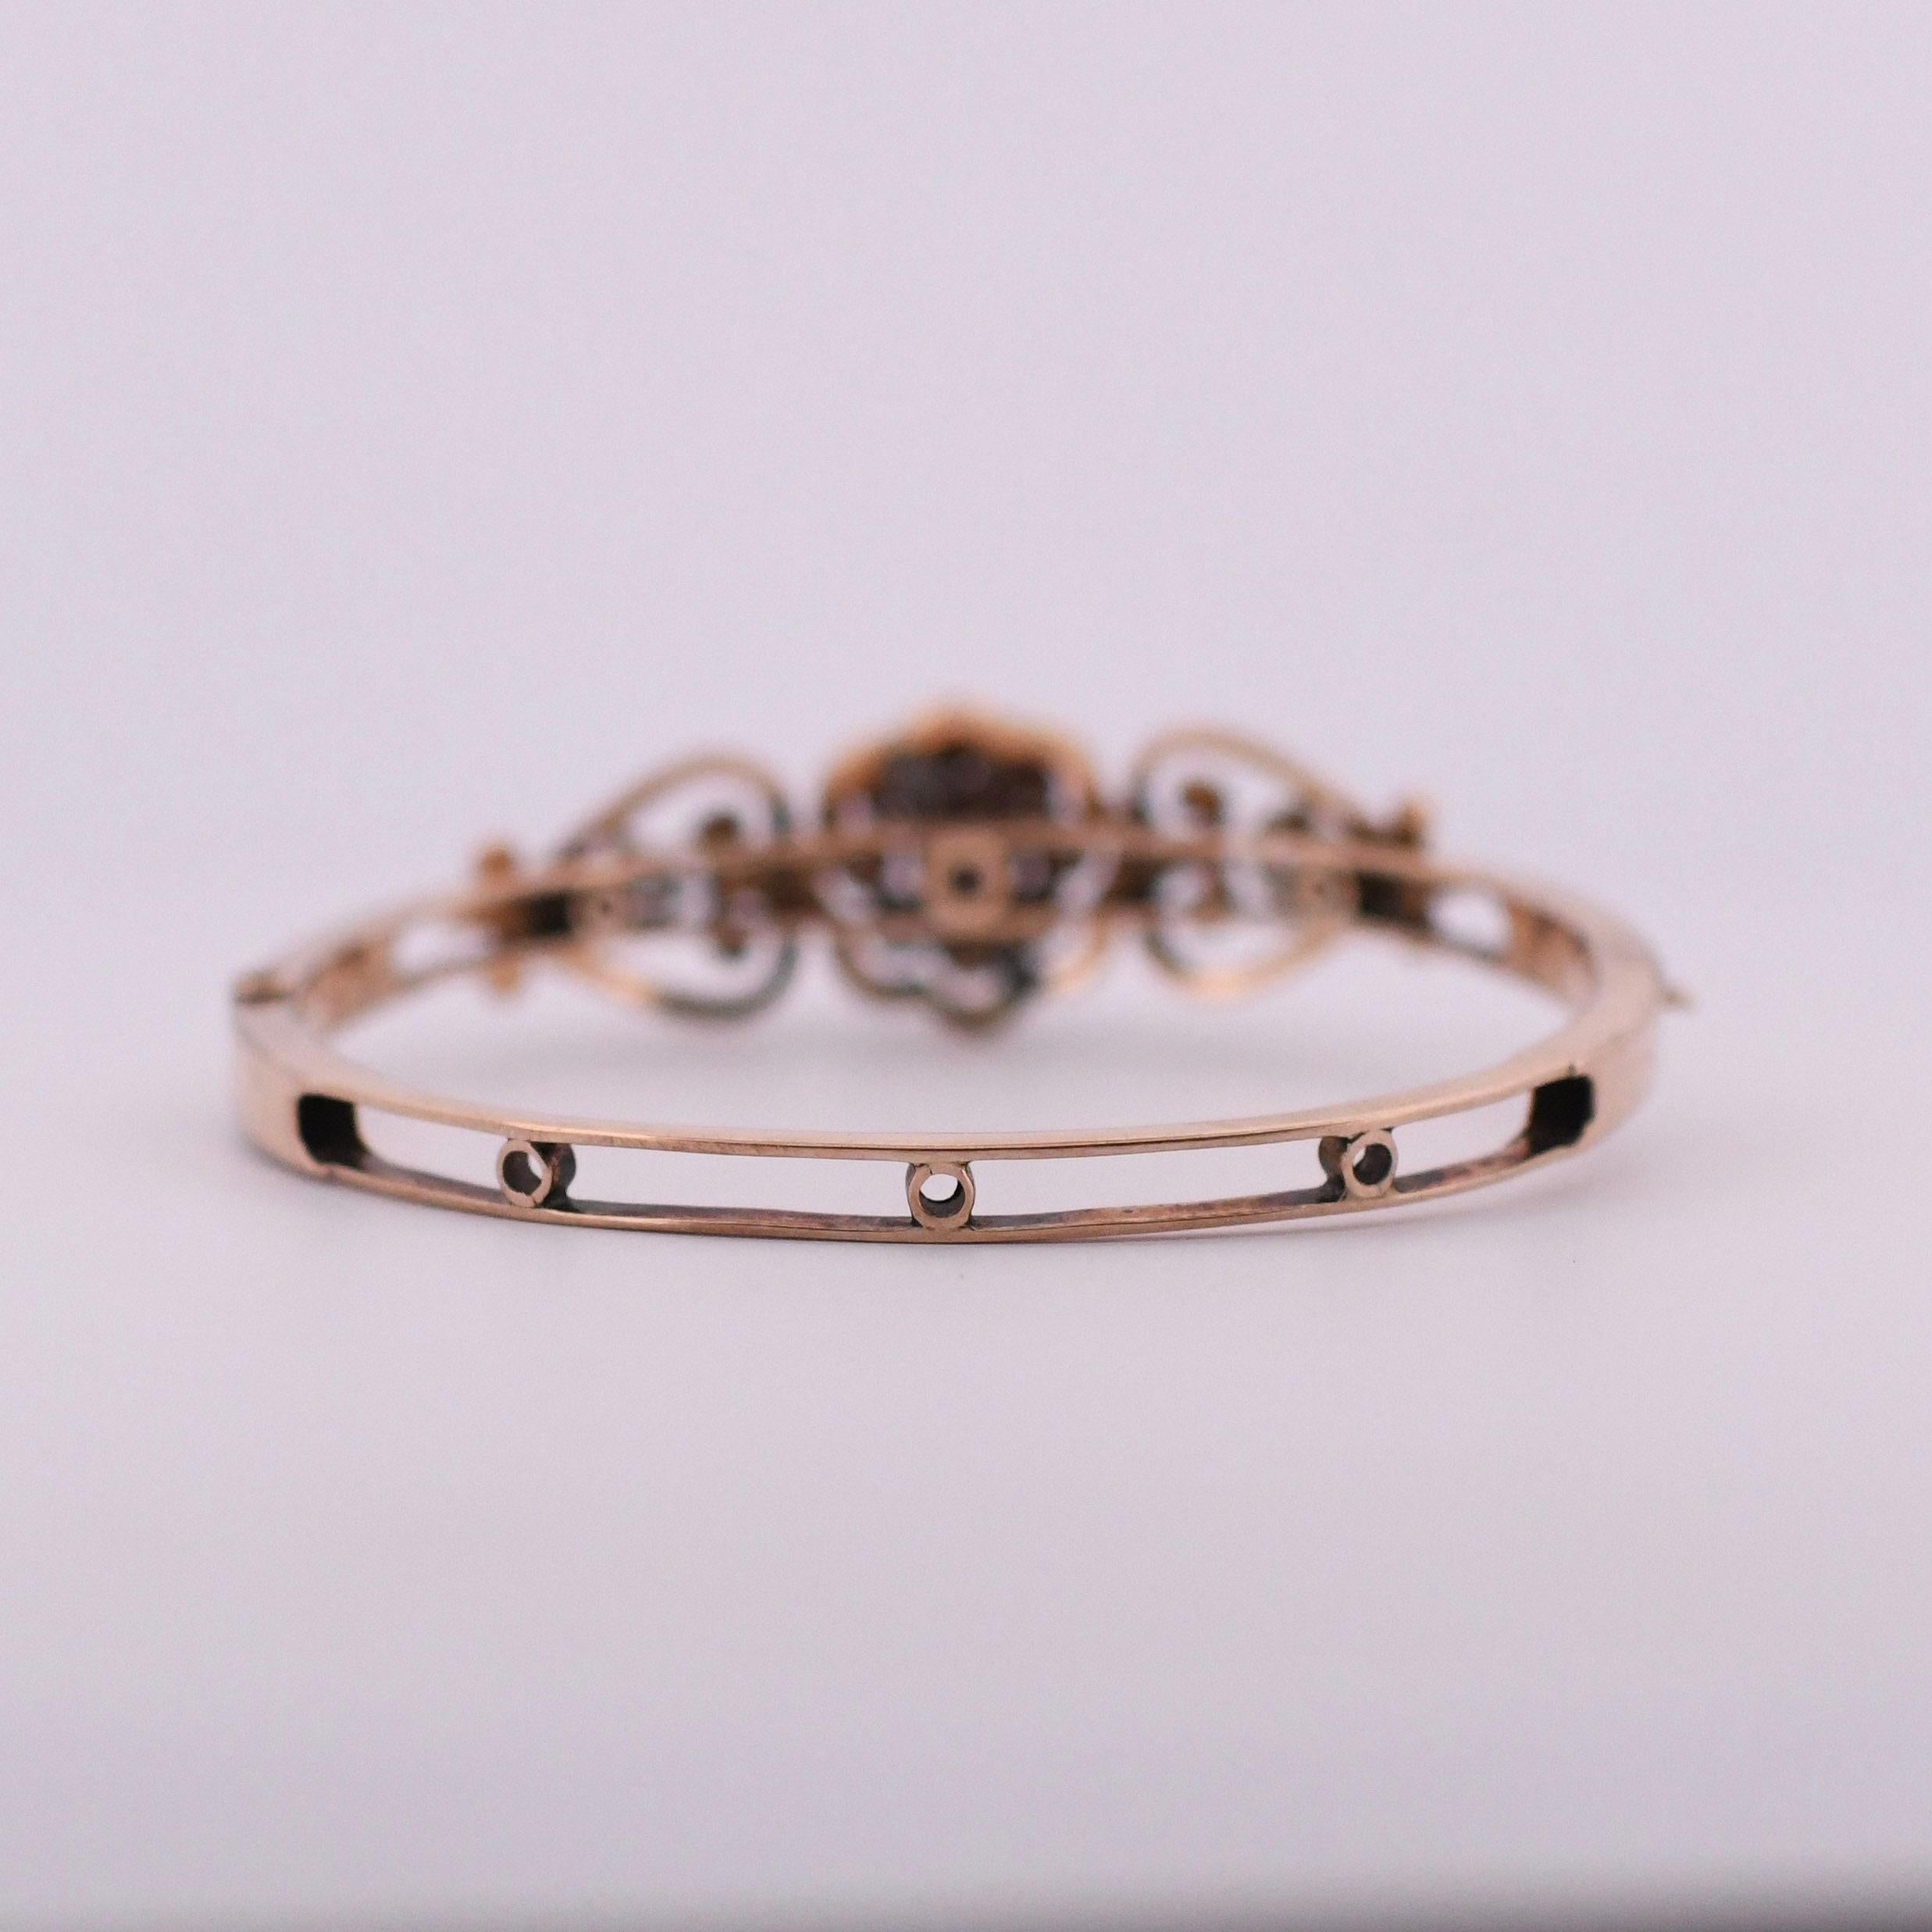 Circa 1800's 14K Rose Gold Diamond and Enamel Bracelet - B-623OXP-N In Good Condition For Sale In Addison, TX